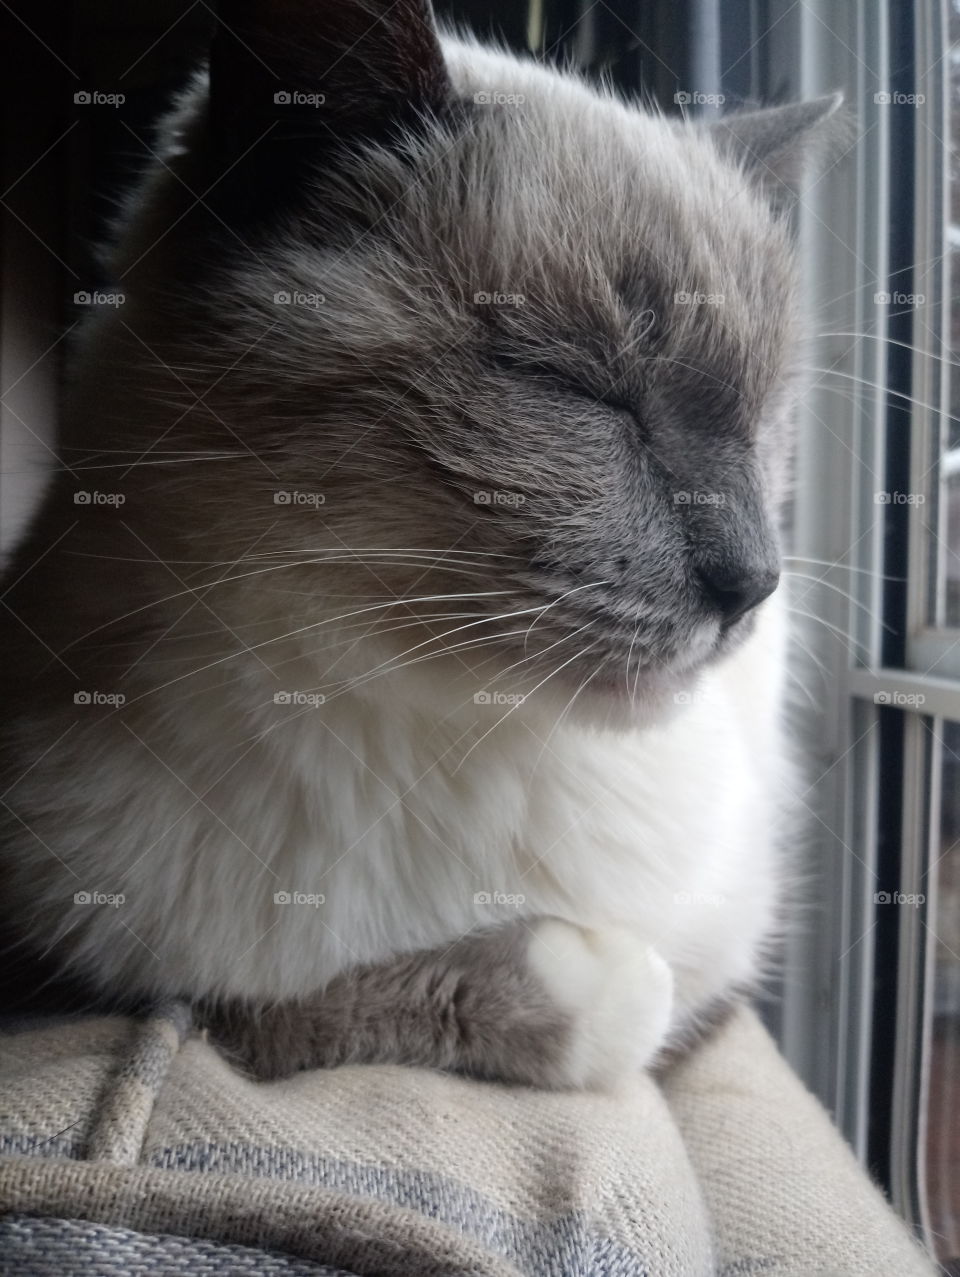 Blue point silver Himalayan Siamese cat closeup of side profile with eyes closed relaxing